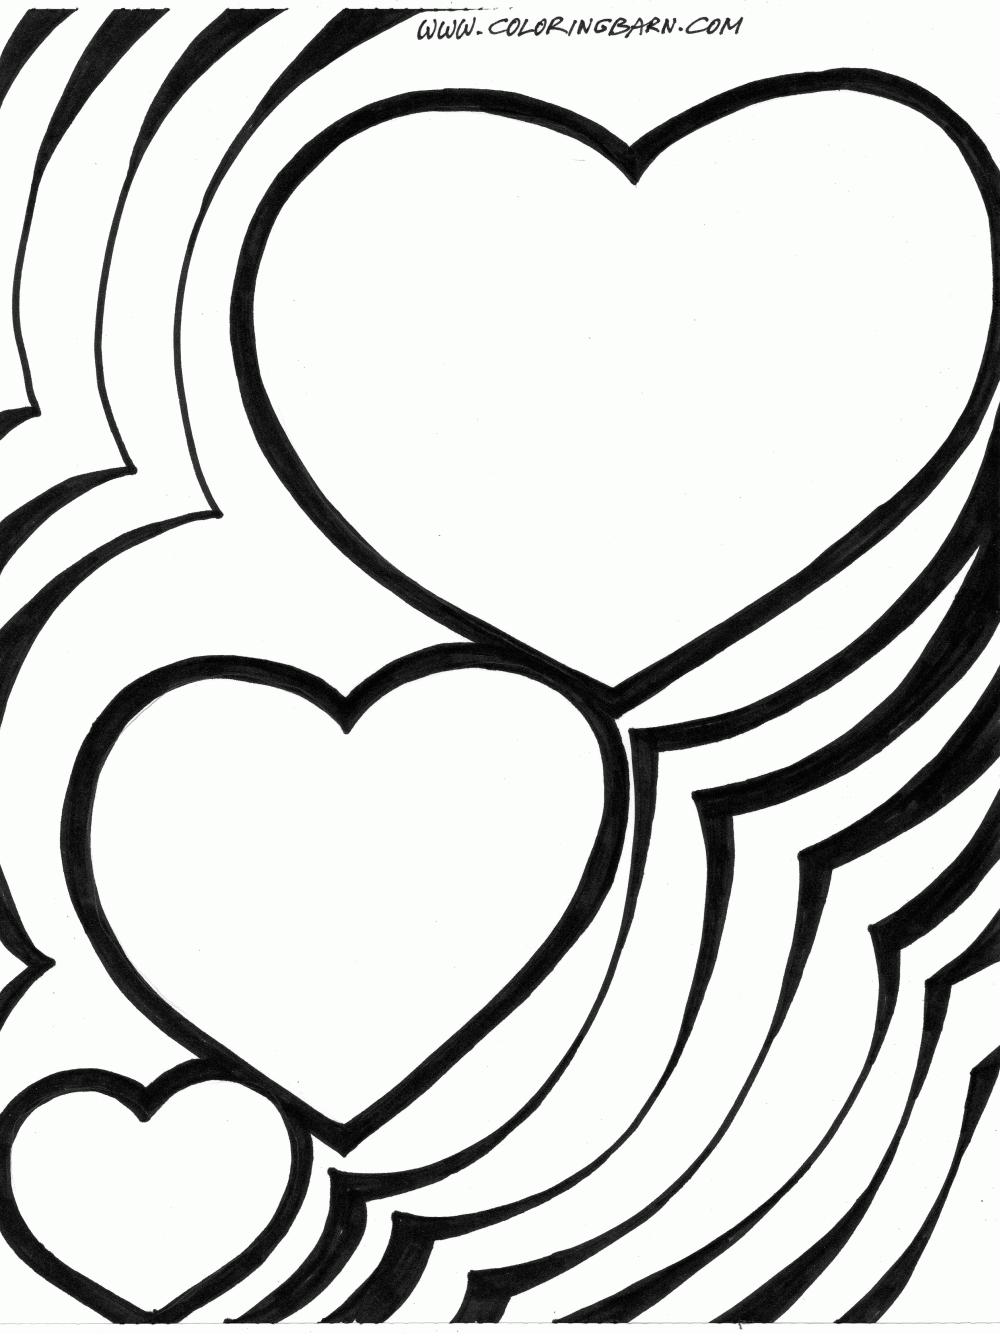 Free Coloring Pages Hearts Coloring Pages Of Hearts And Flowers Coloring Pages Hearts Coloring